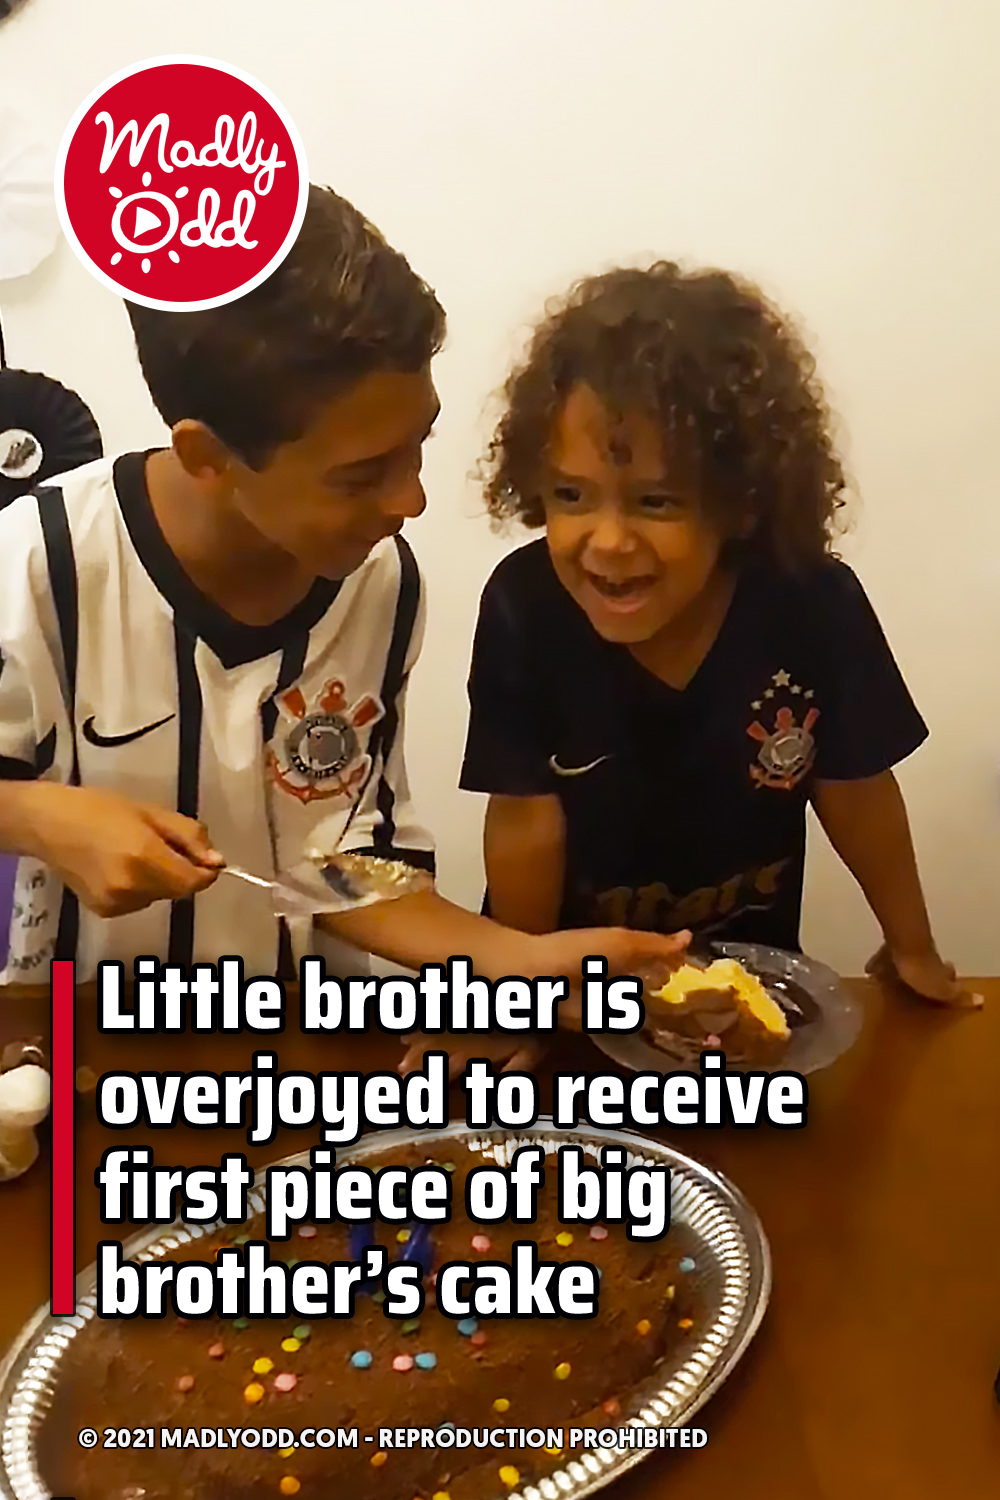 Little brother is overjoyed to receive first piece of big brother’s cake